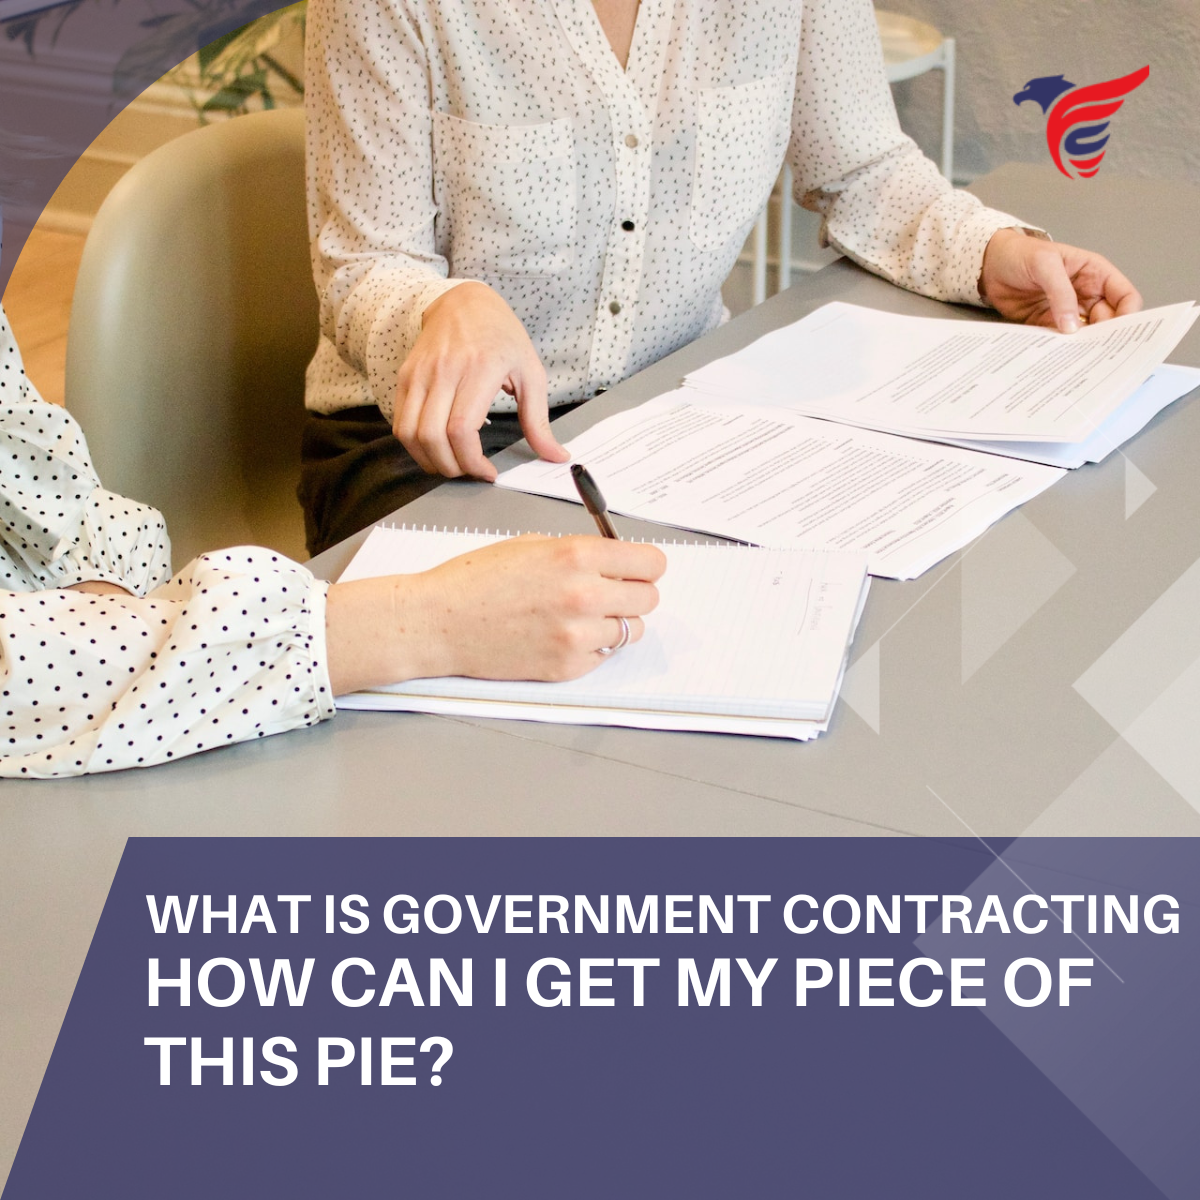 What is government contracting